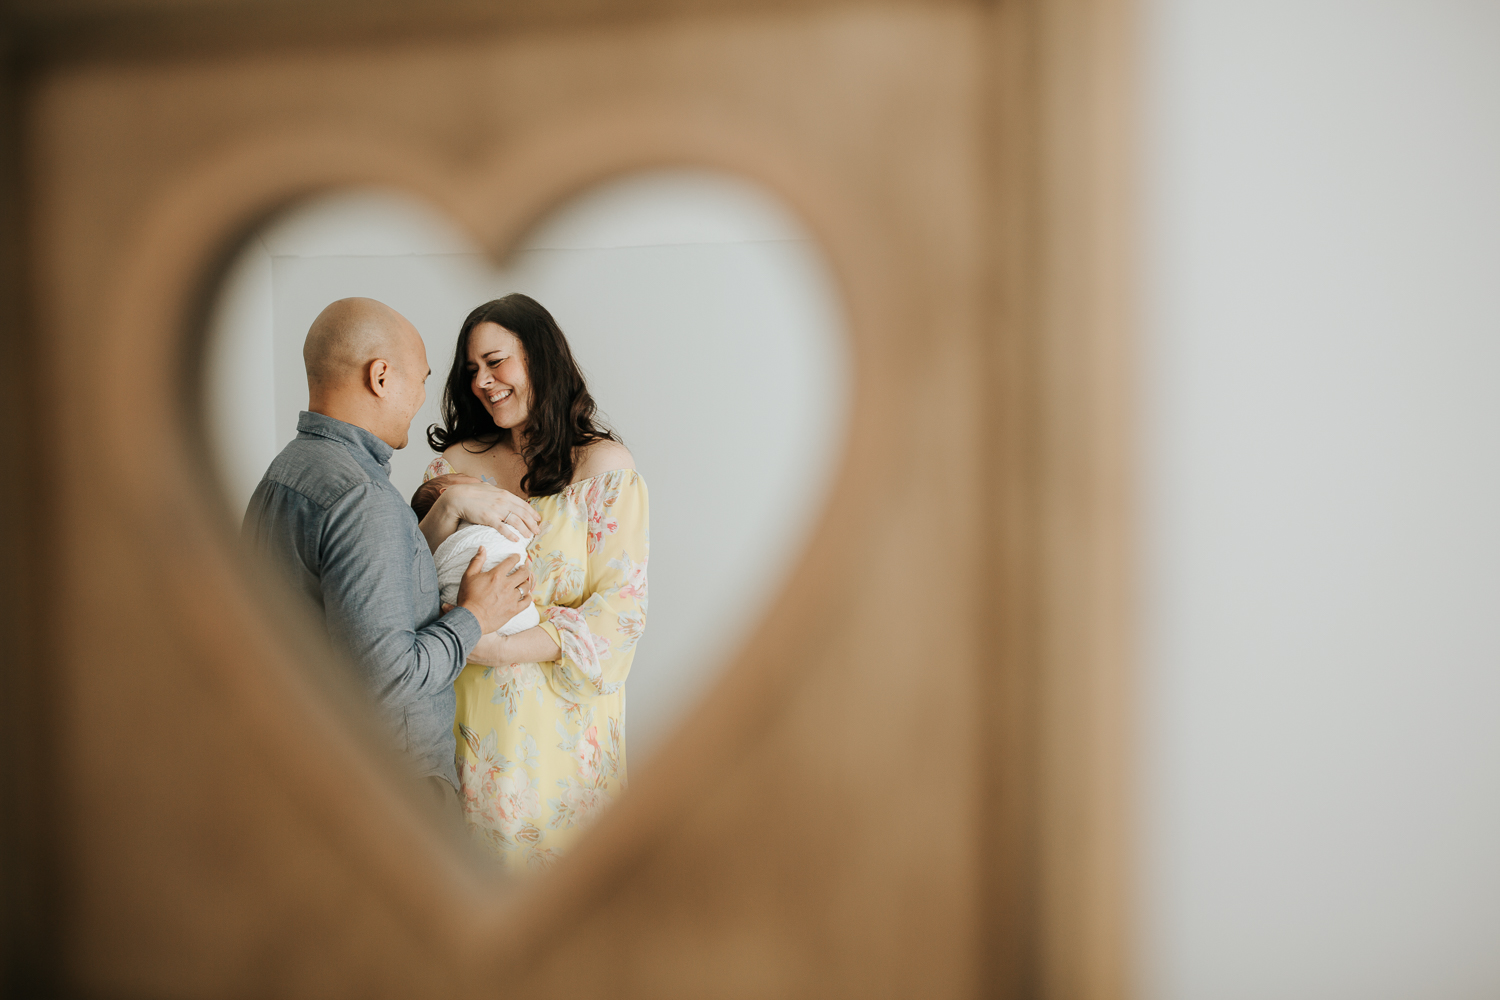 new parents framed in heart mirror, mother holding sleeping 3 week old baby boy to her chest, smiling at husband, dad's hand on son - GTA Lifestyle Photos